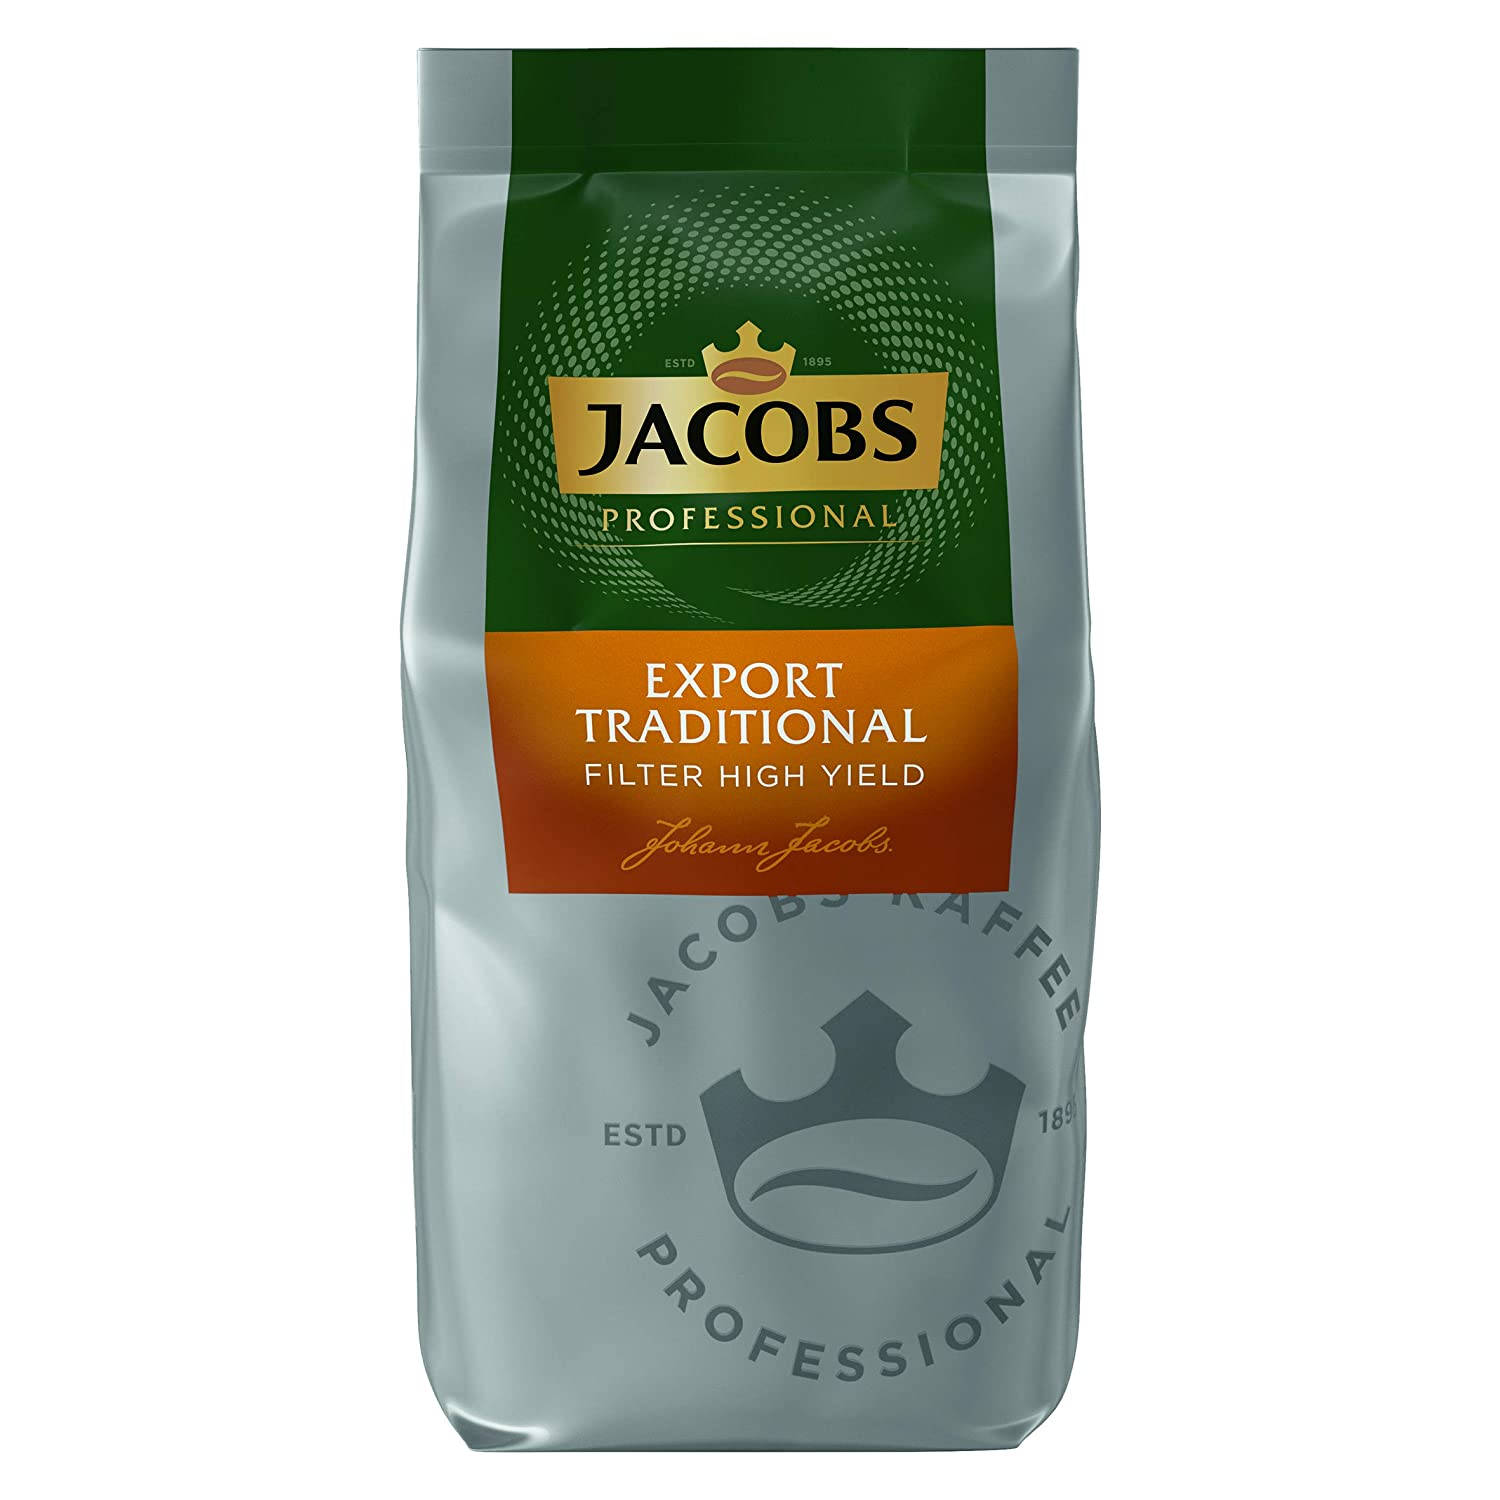 Yield (Filtermaschinen, High JACOBS Professional Press) Filterkaffee French 2x800g Traditional Export